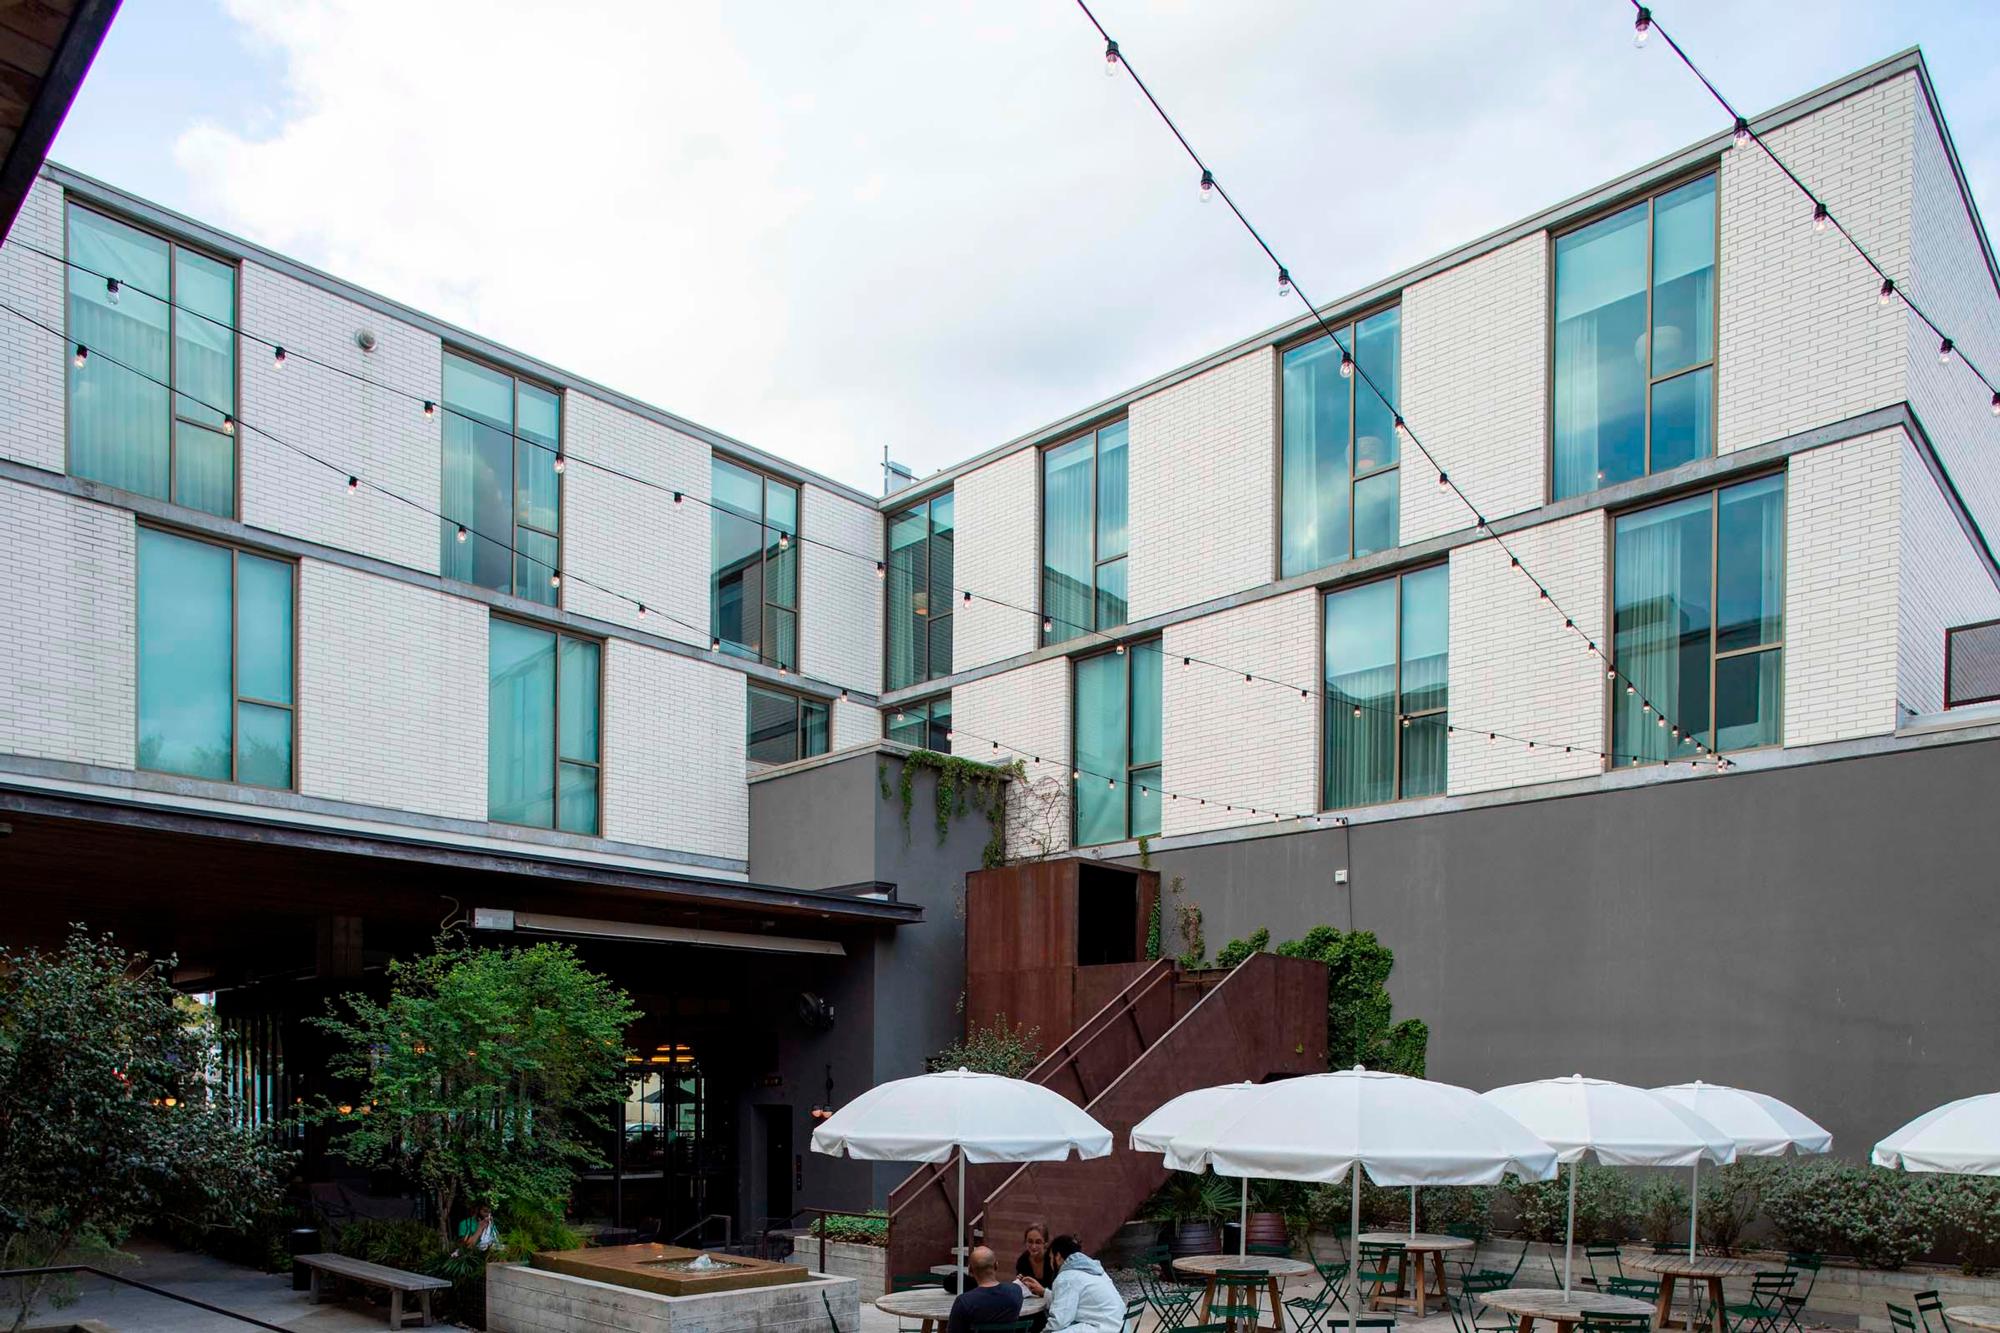 Image of the patio and bricked, windowed walls at the South Congress Hotel